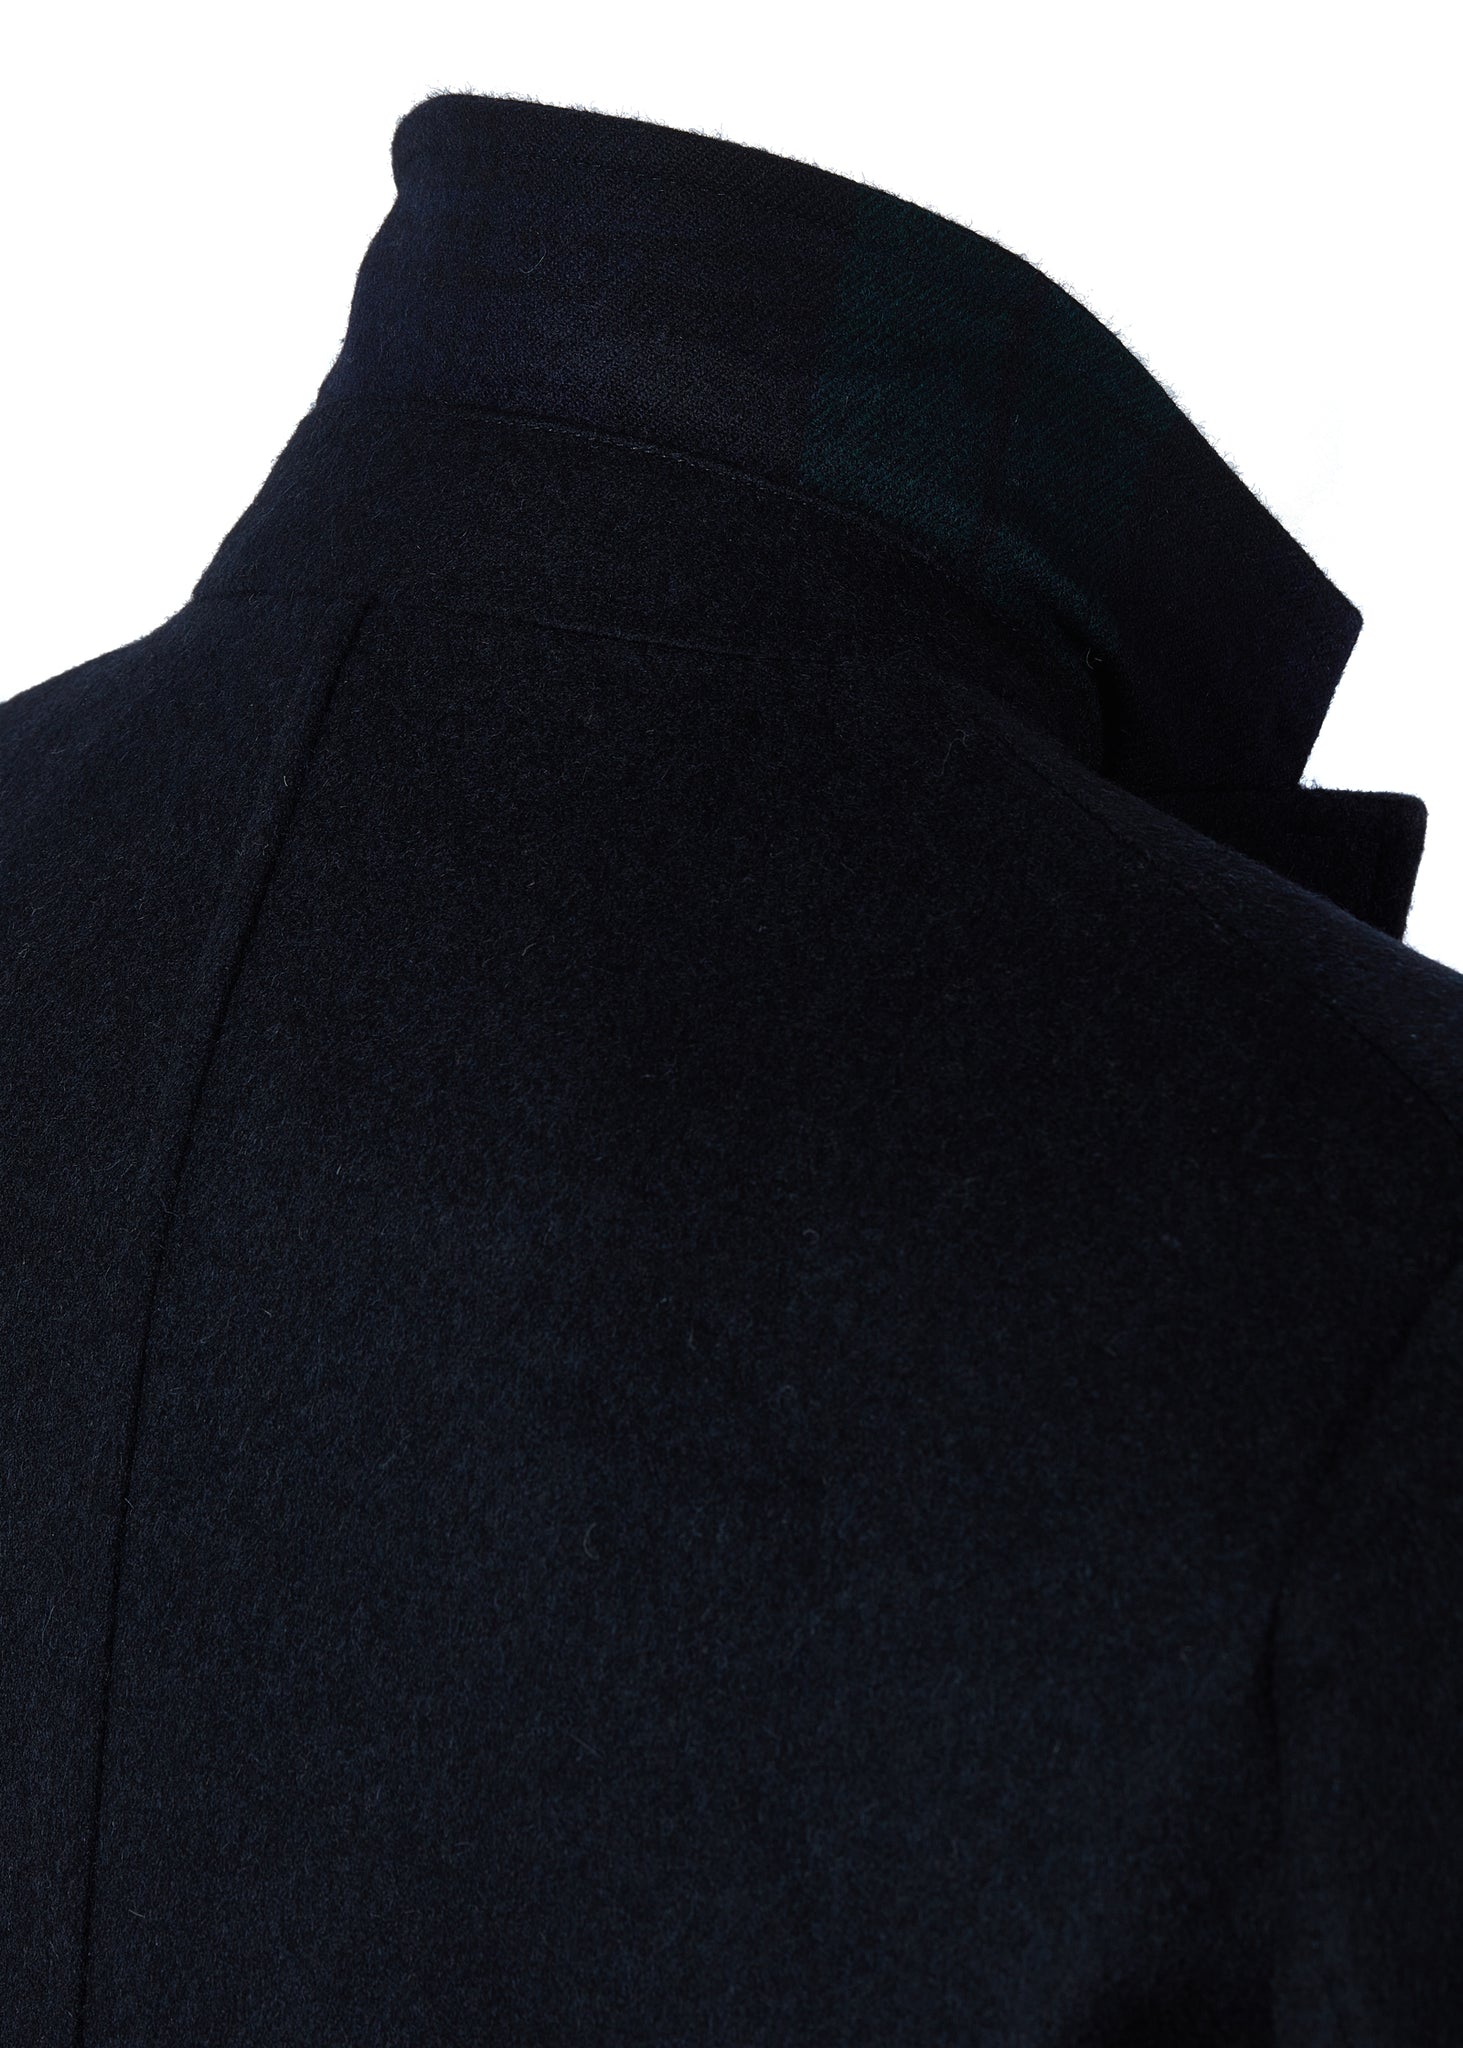 Navy mens coat with collar popped to show blackwatch navy green under collar